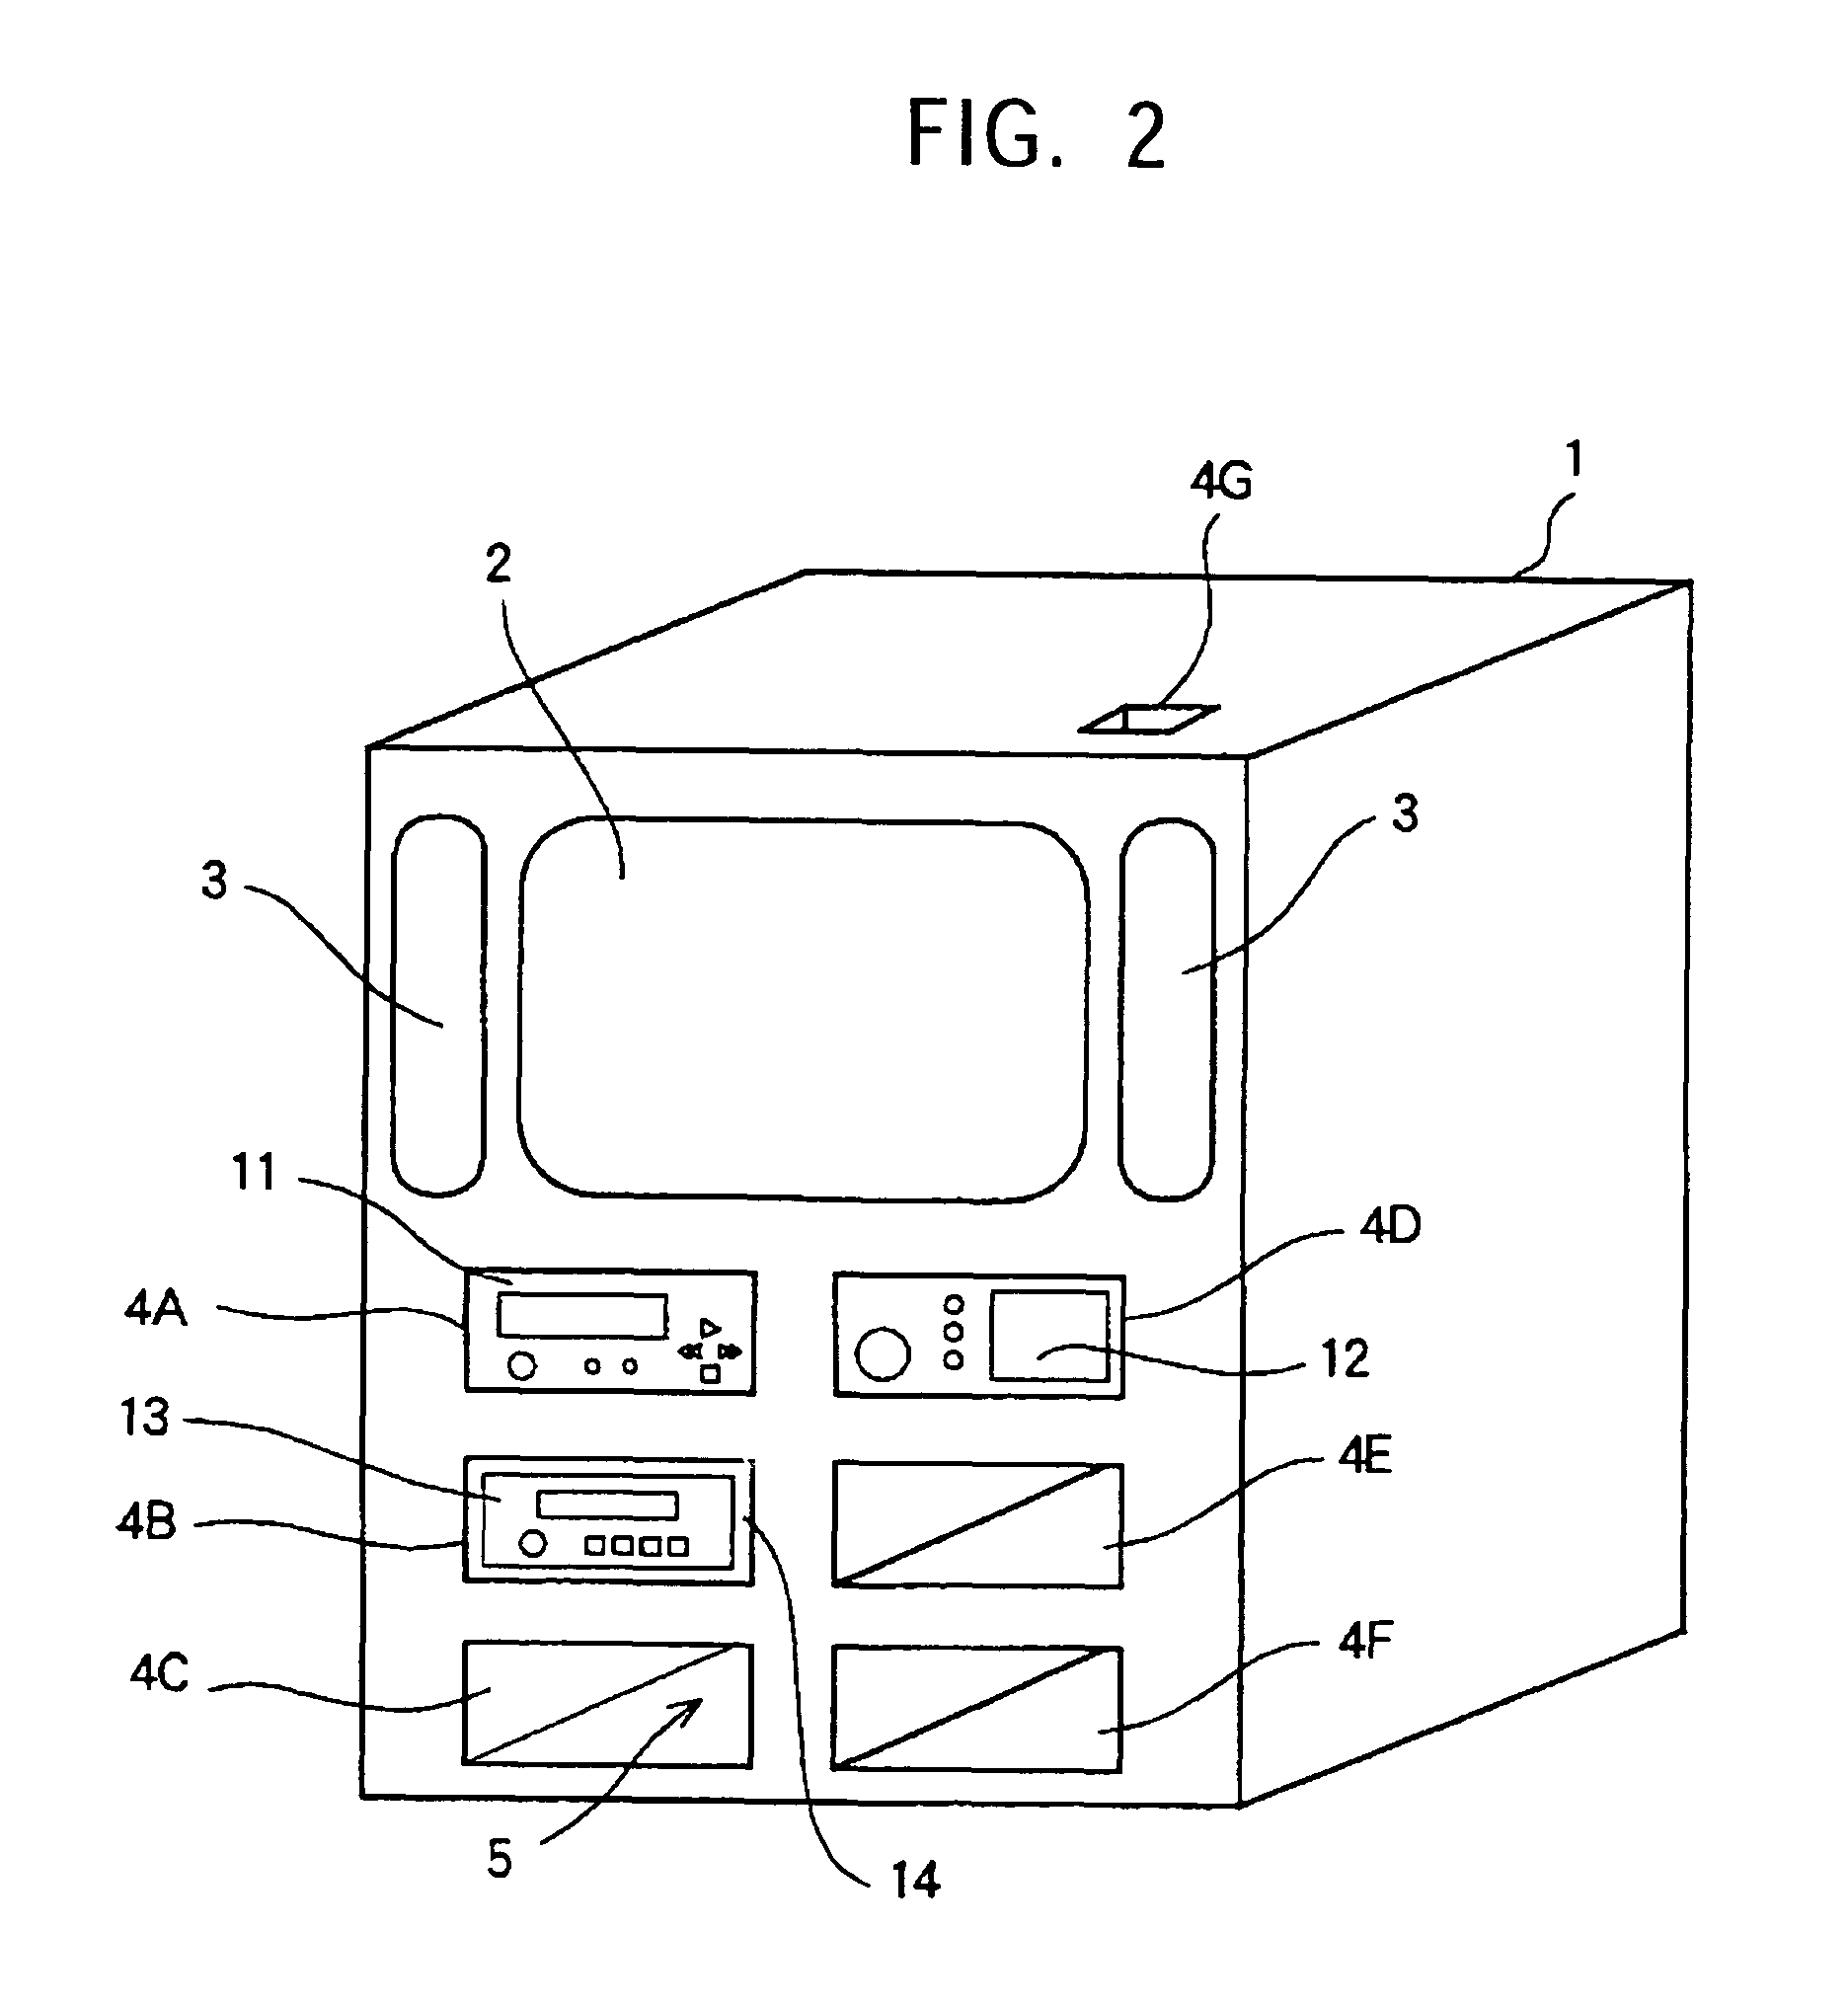 Signal processing device, housing rack, and connector